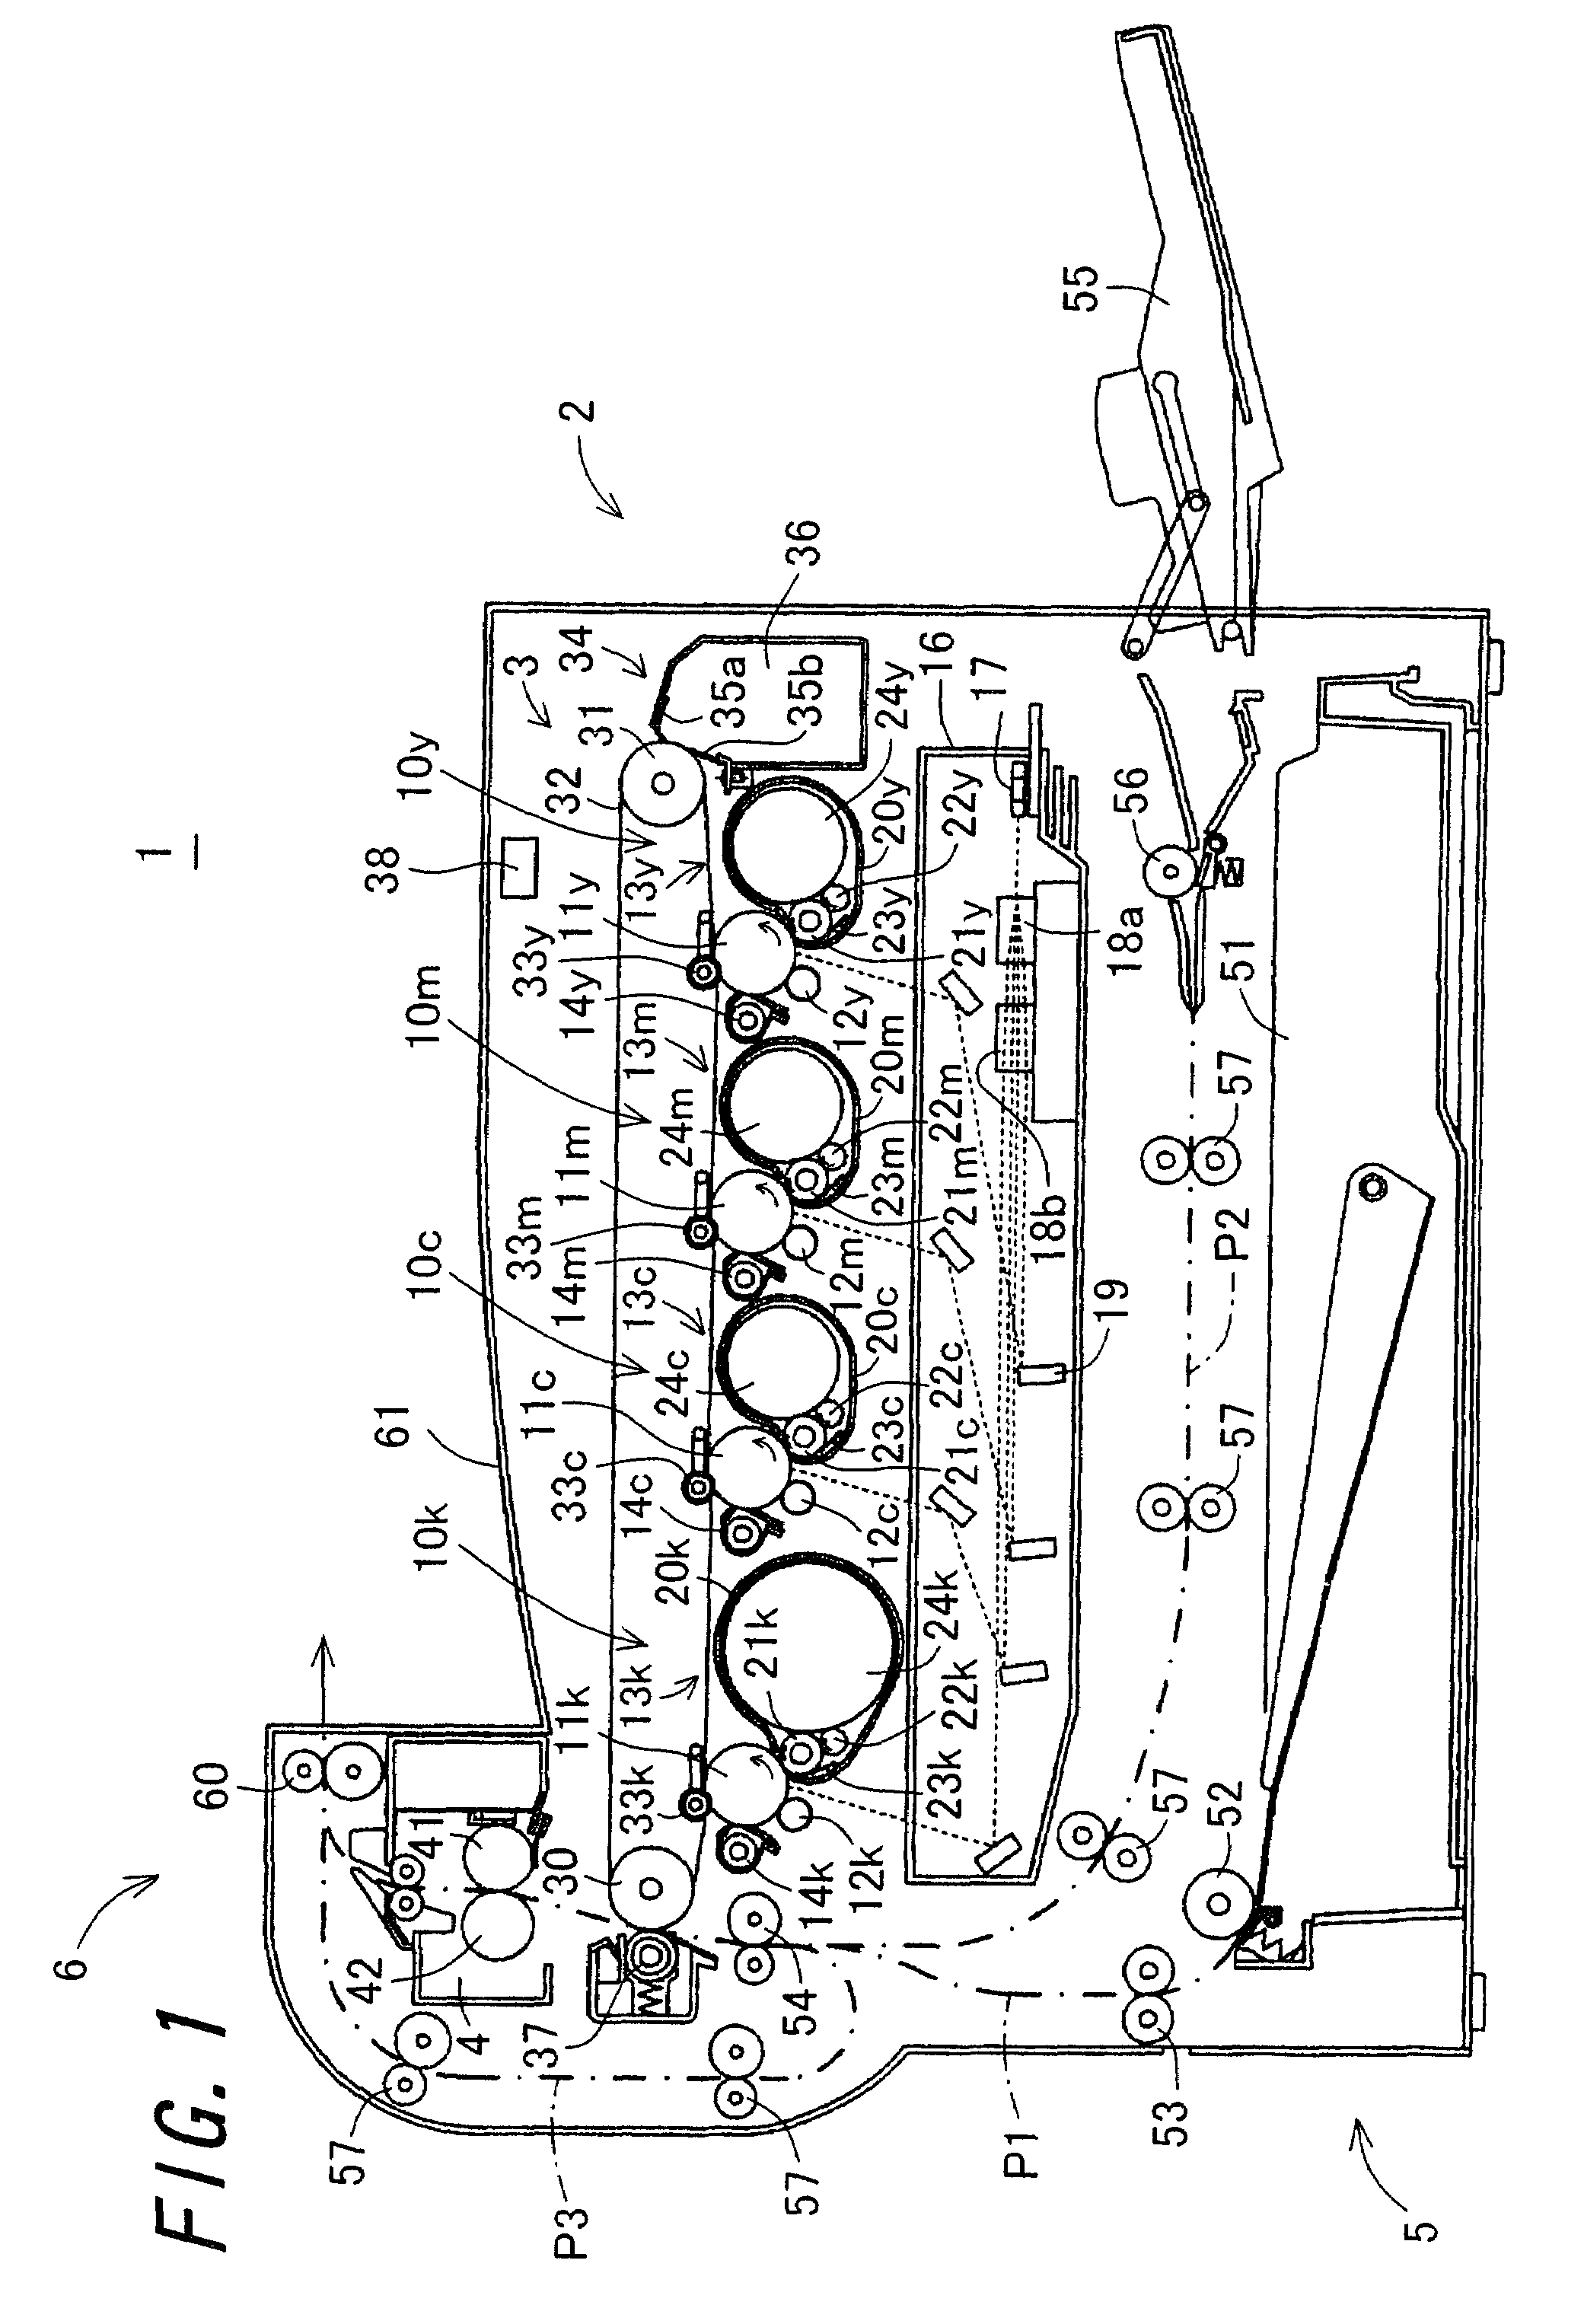 Image forming apparatus with variable process speed